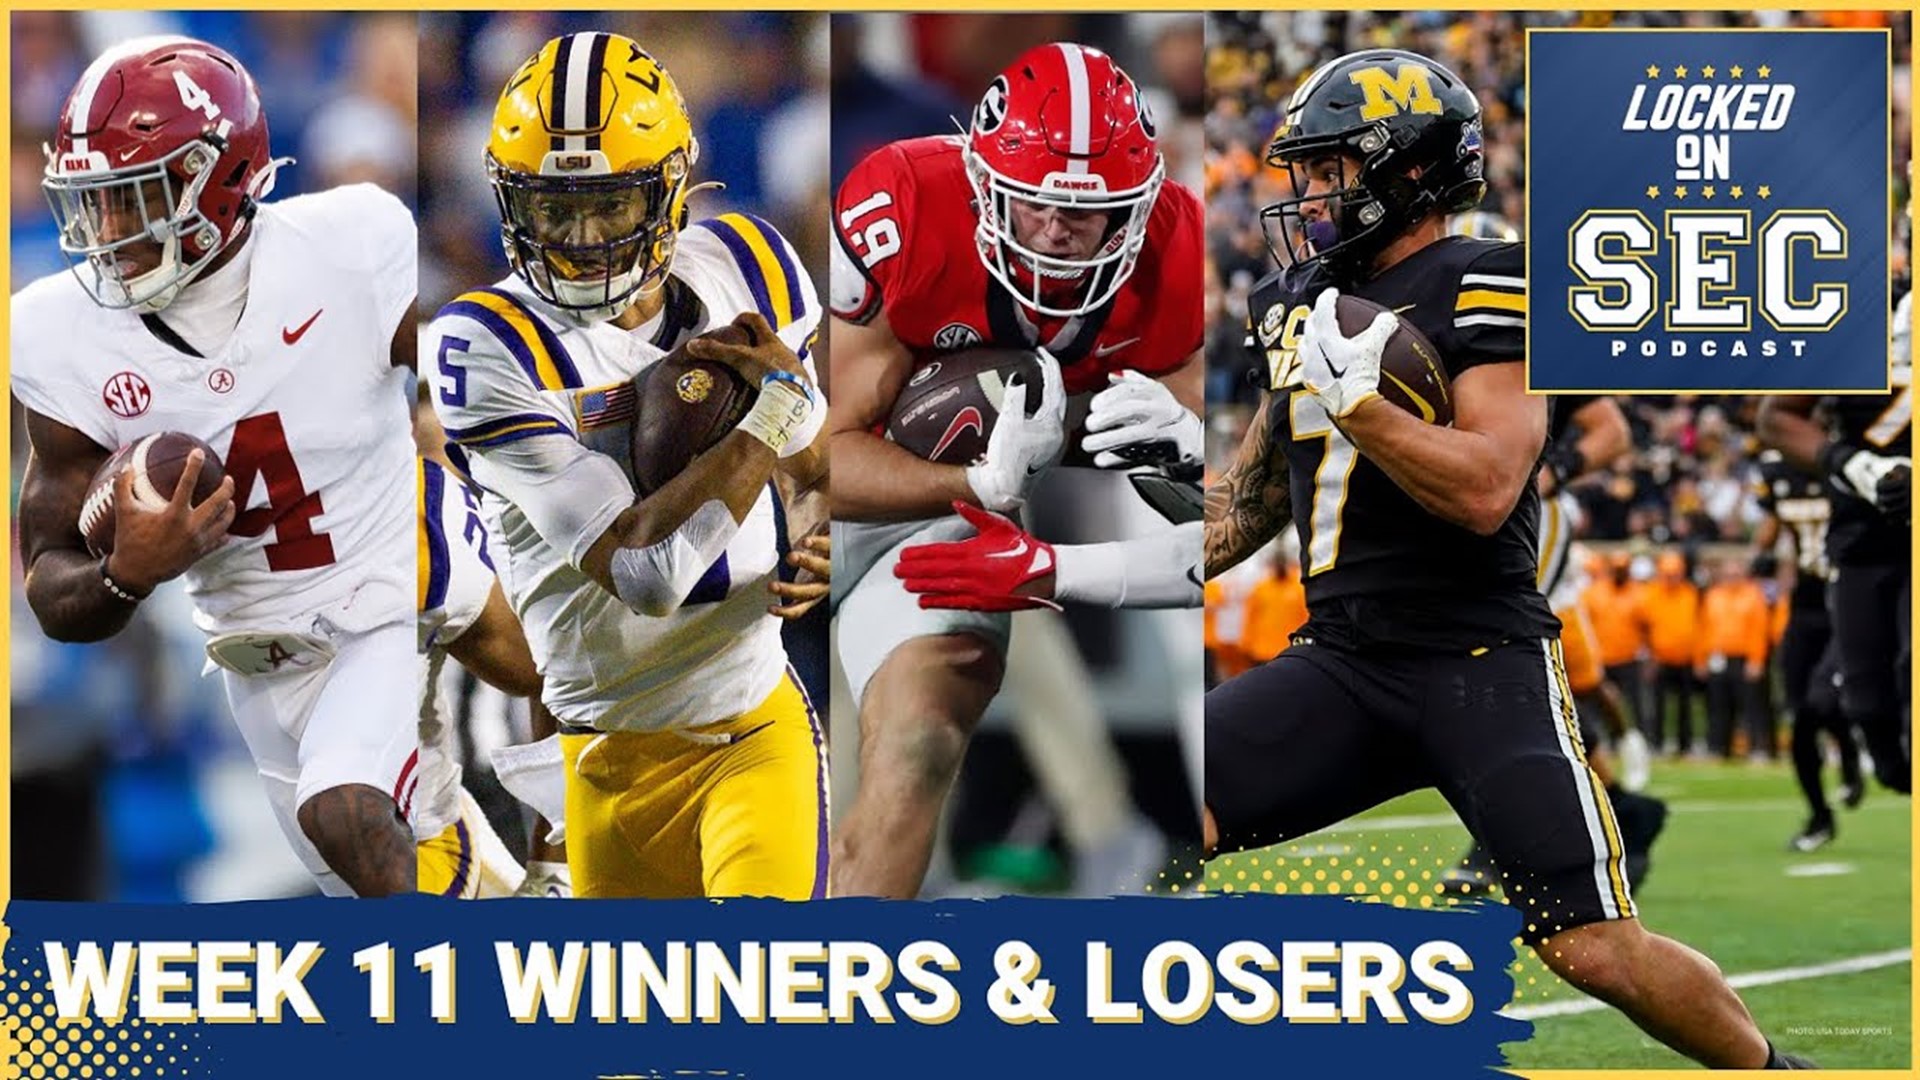 College football winners and losers: Ranking the final regular